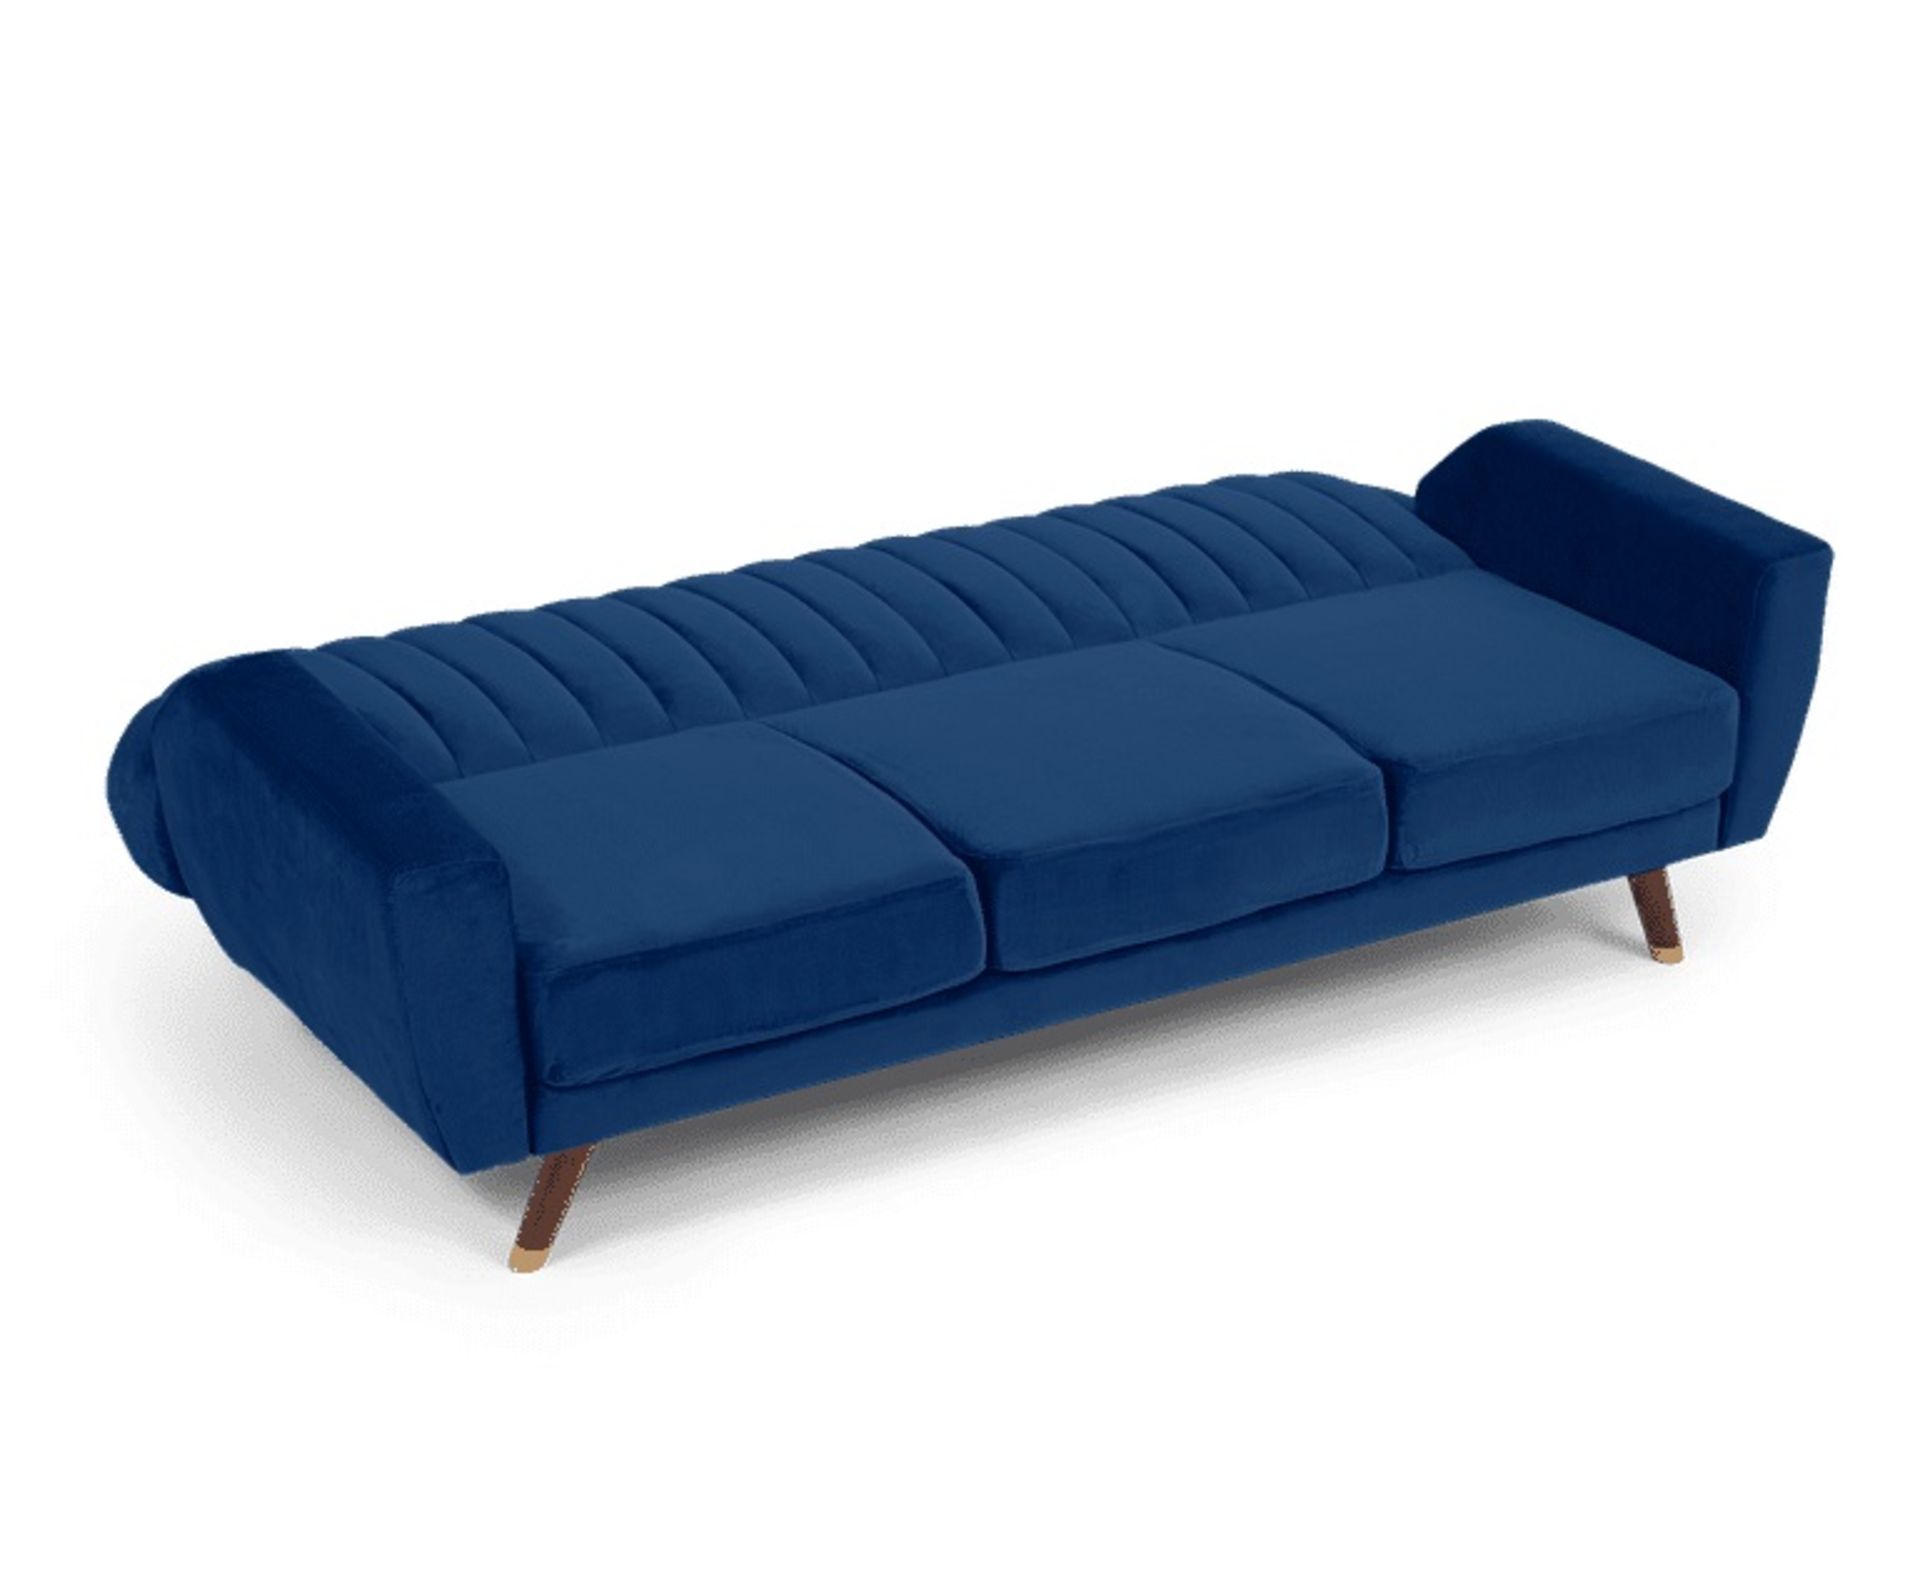 Lucia Sofa Bed In Blue Velvet A Beautiful Curved Backrest And Contrasting Dark Wooden Legs - The - Image 3 of 3